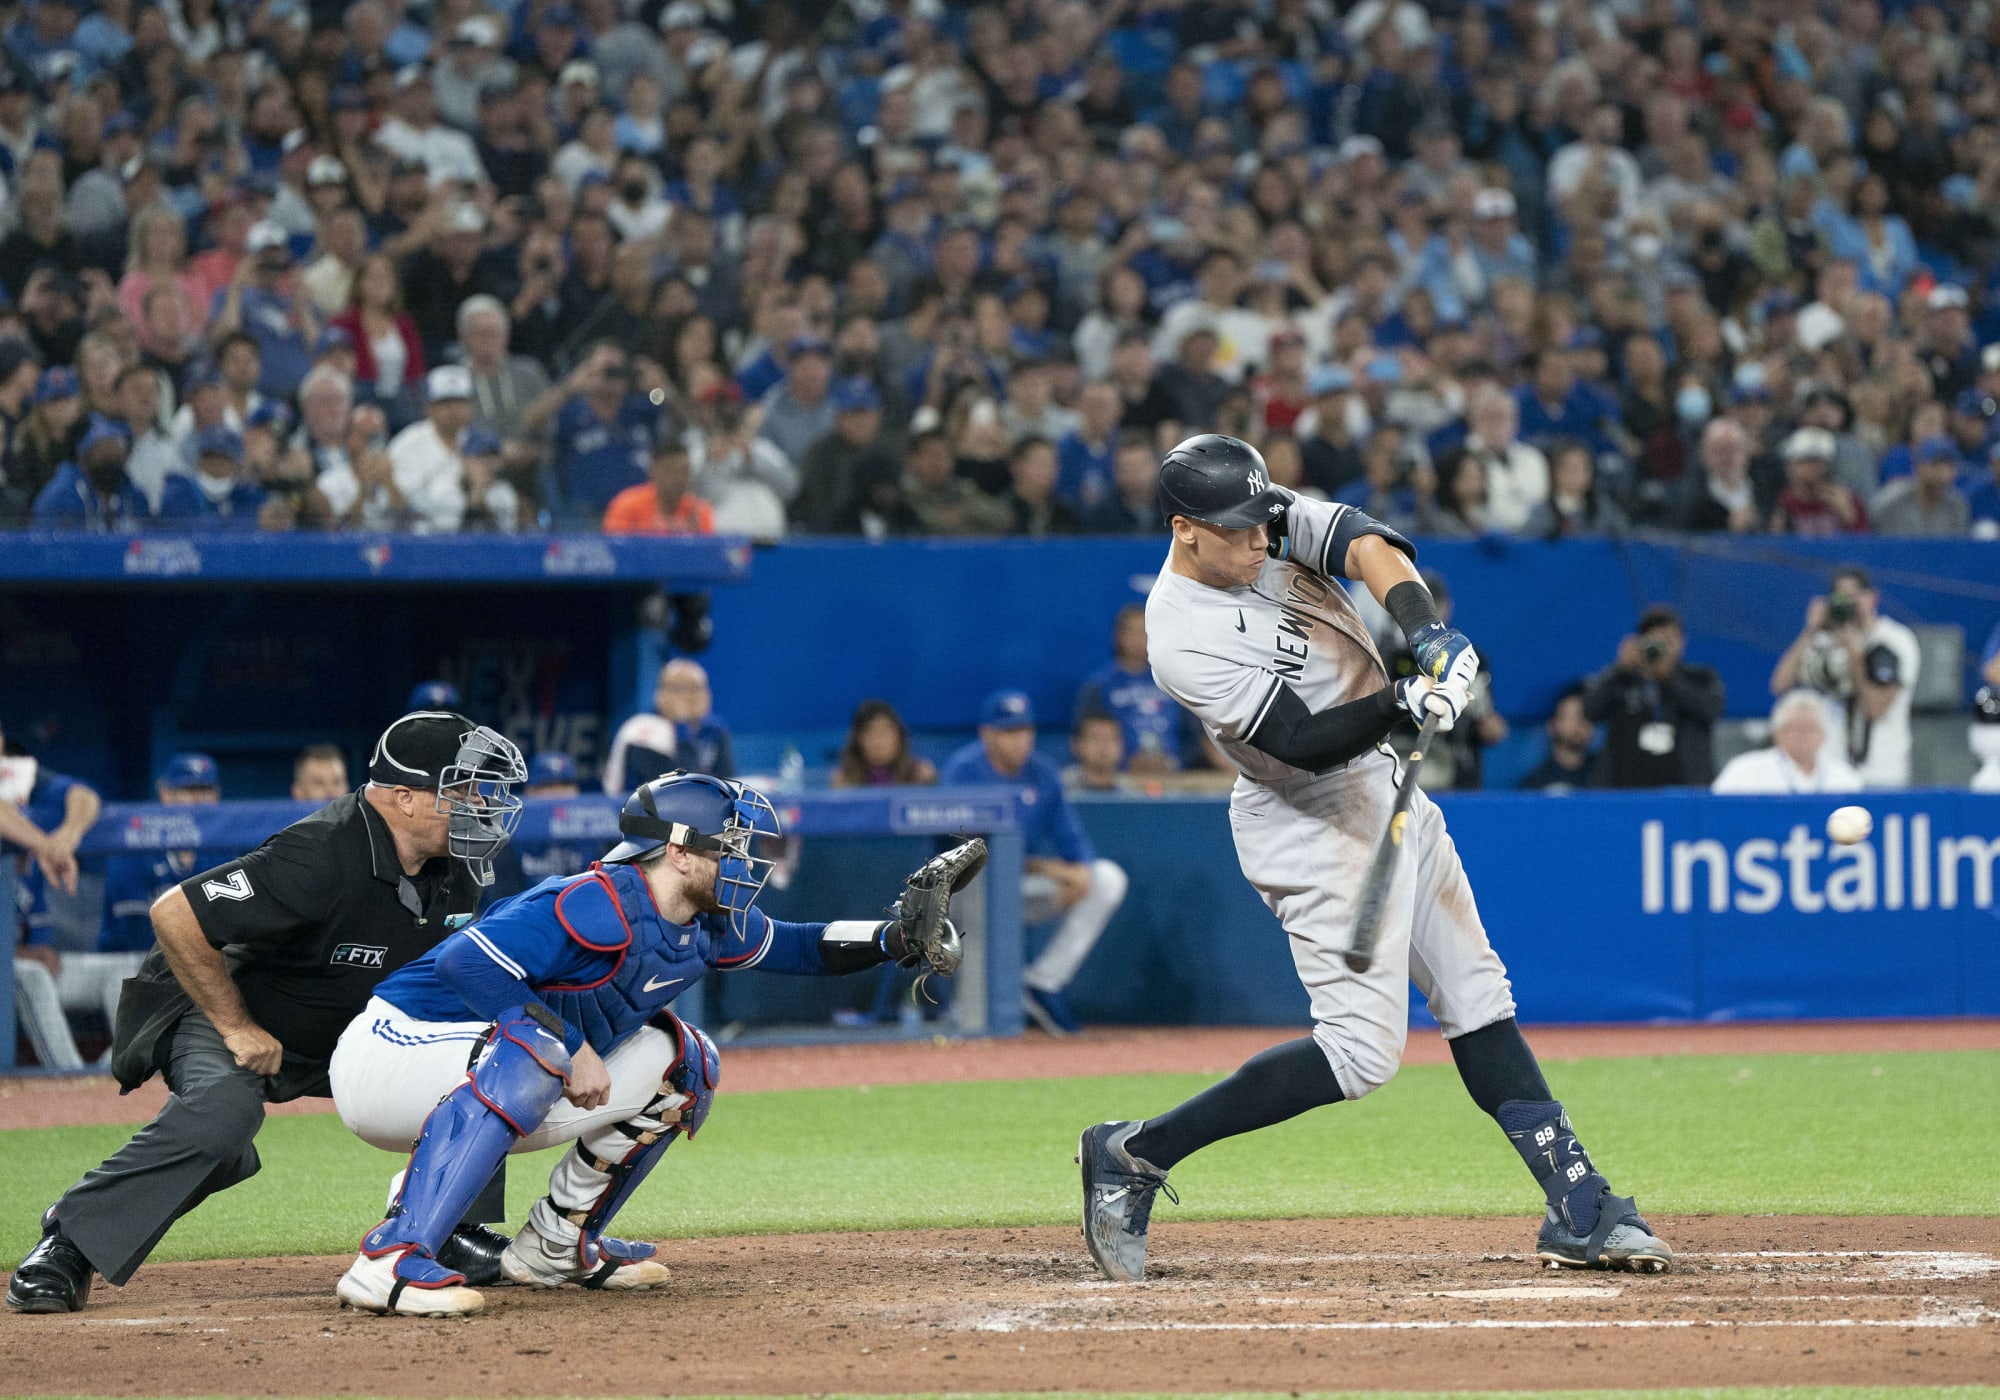 NY Yankees lose to Toronto Blue Jays as Aaron Boone decision backfires